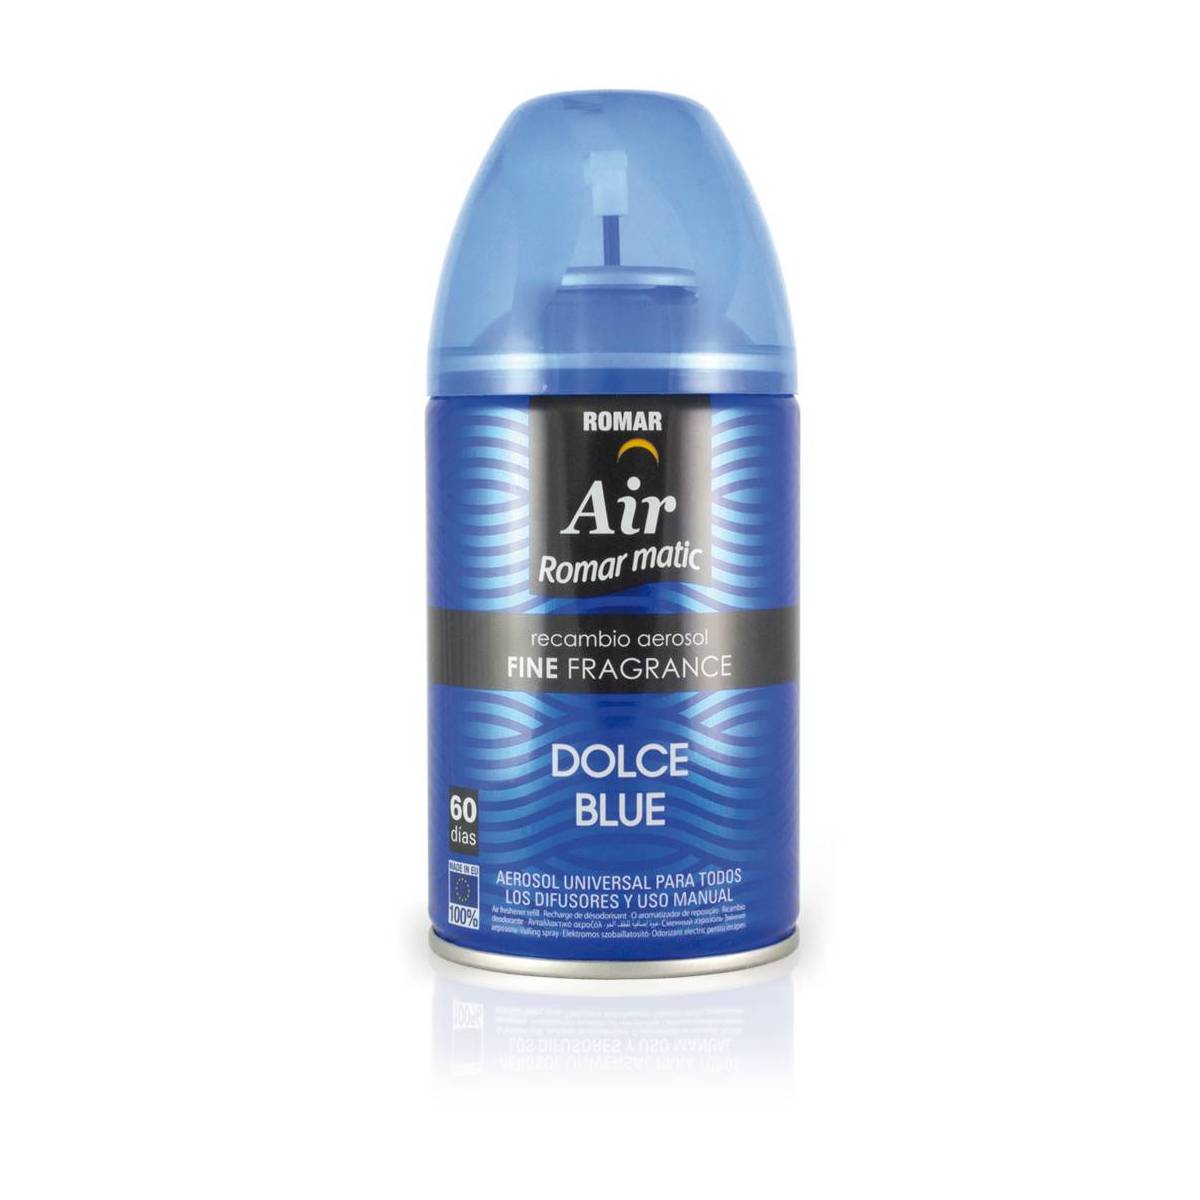 6 Refill for Dolce Blue automatic air freshener